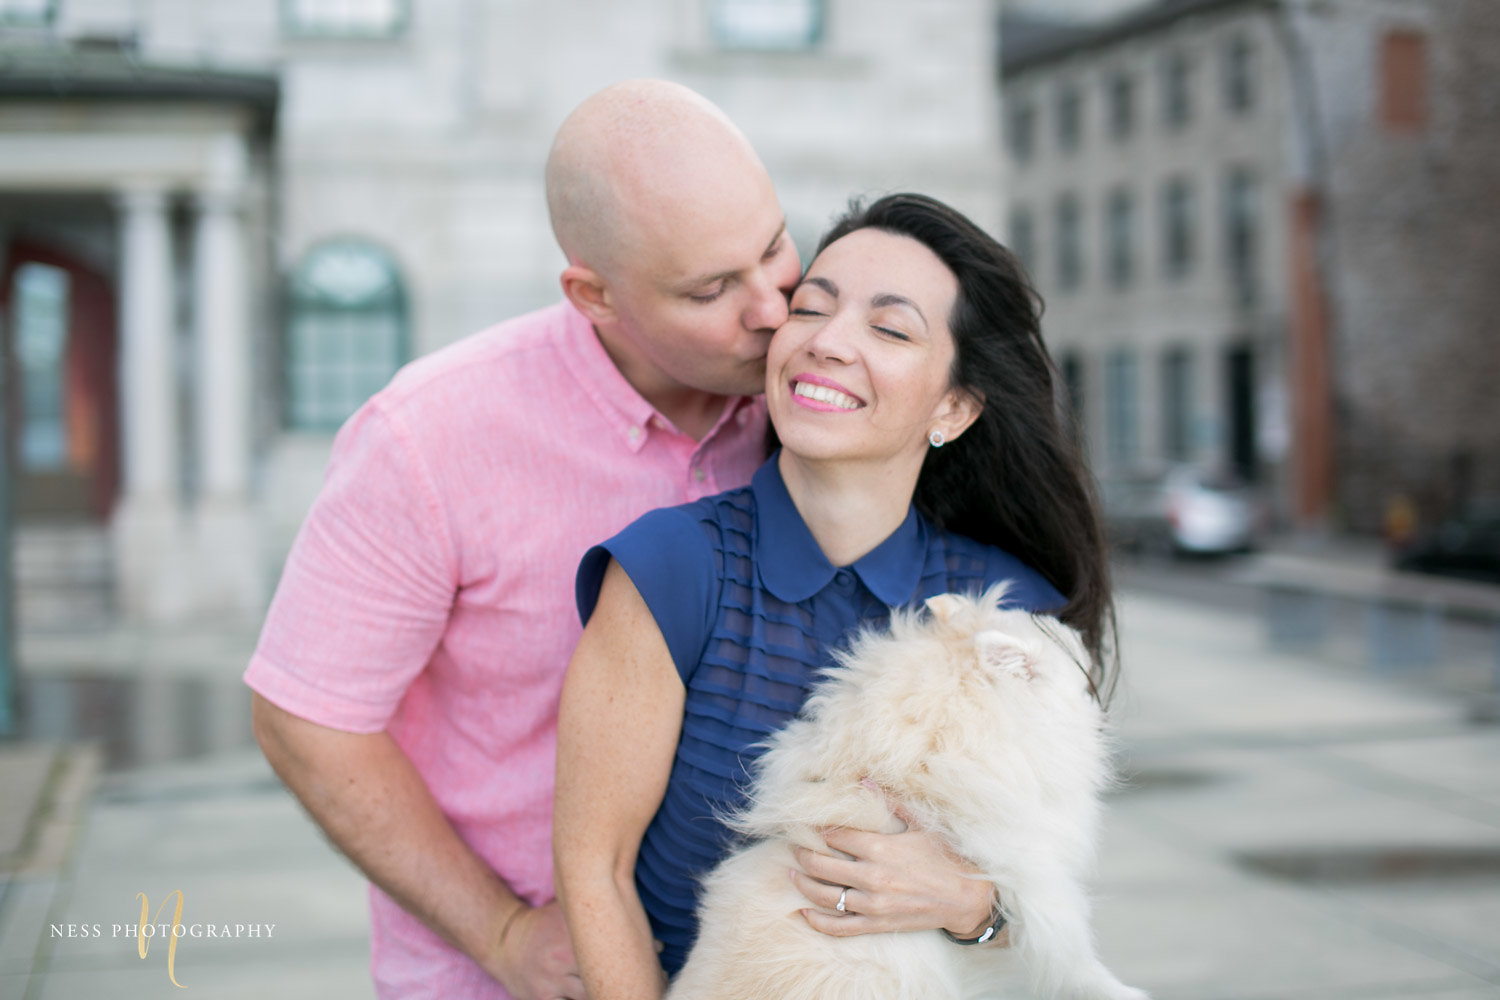 Adelina & Dan Engagement Photos Old Port Montreal with white dog By Ness Photography Wedding and Engagement Photographer 117.jpg